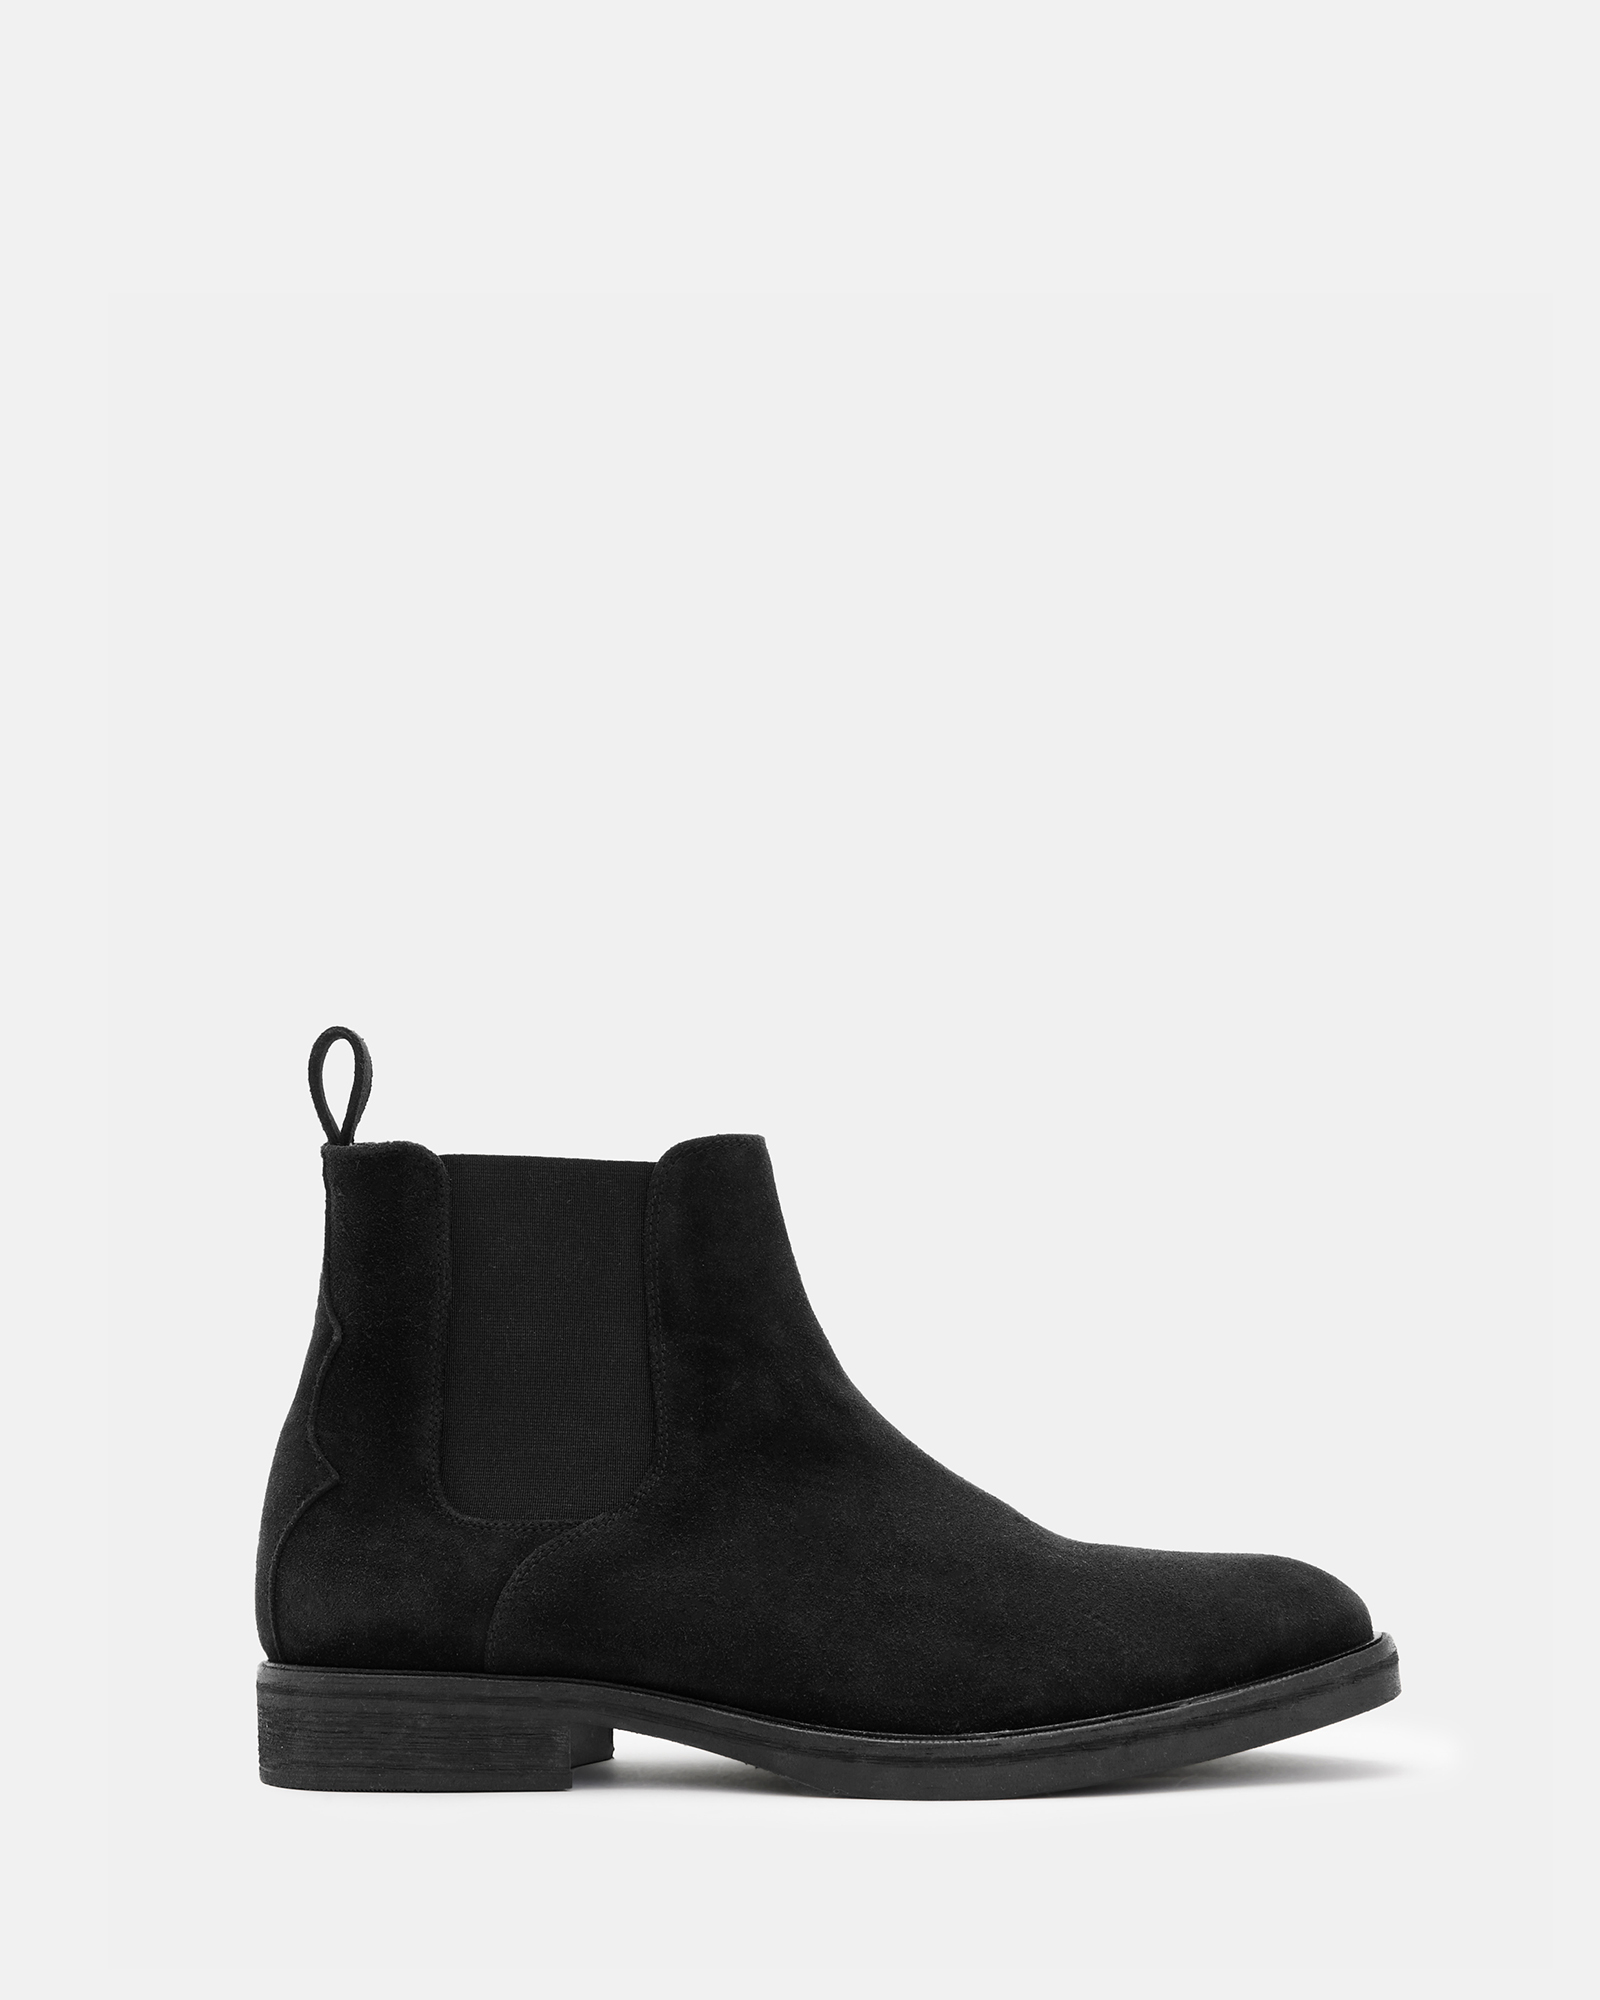 AllSaints Creed Suede Chelsea Boots